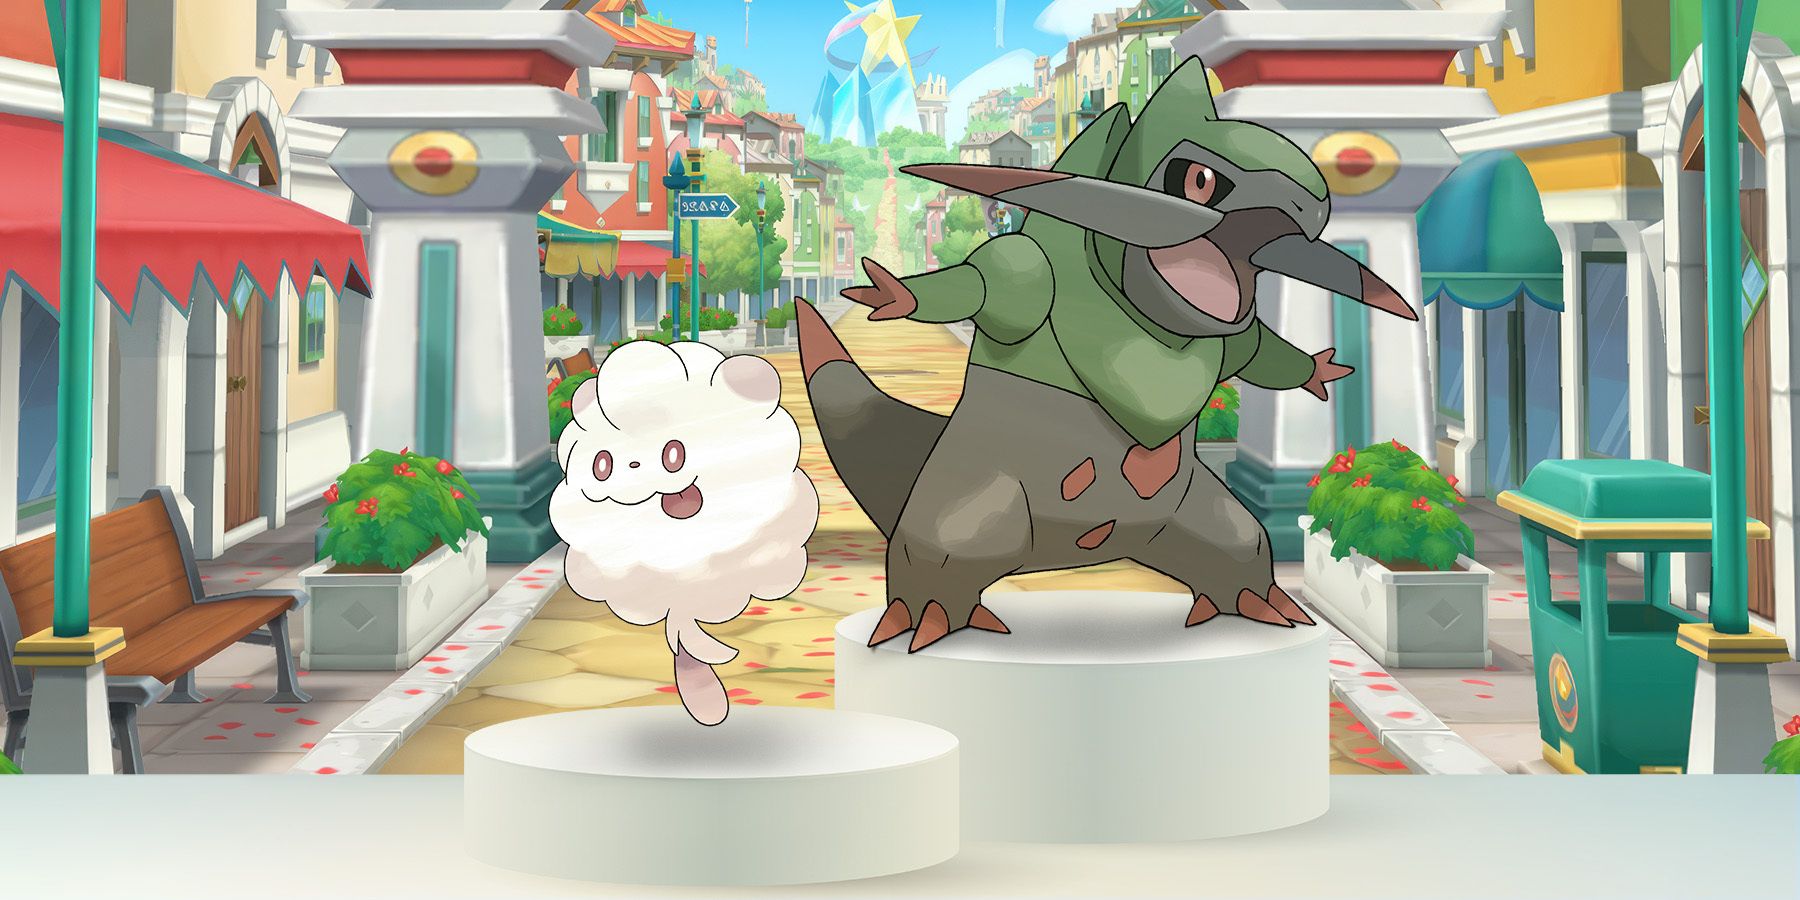 Swirlix and Fraxure side-by-side on pedestals against a town backdrop from the Pokemon anime.